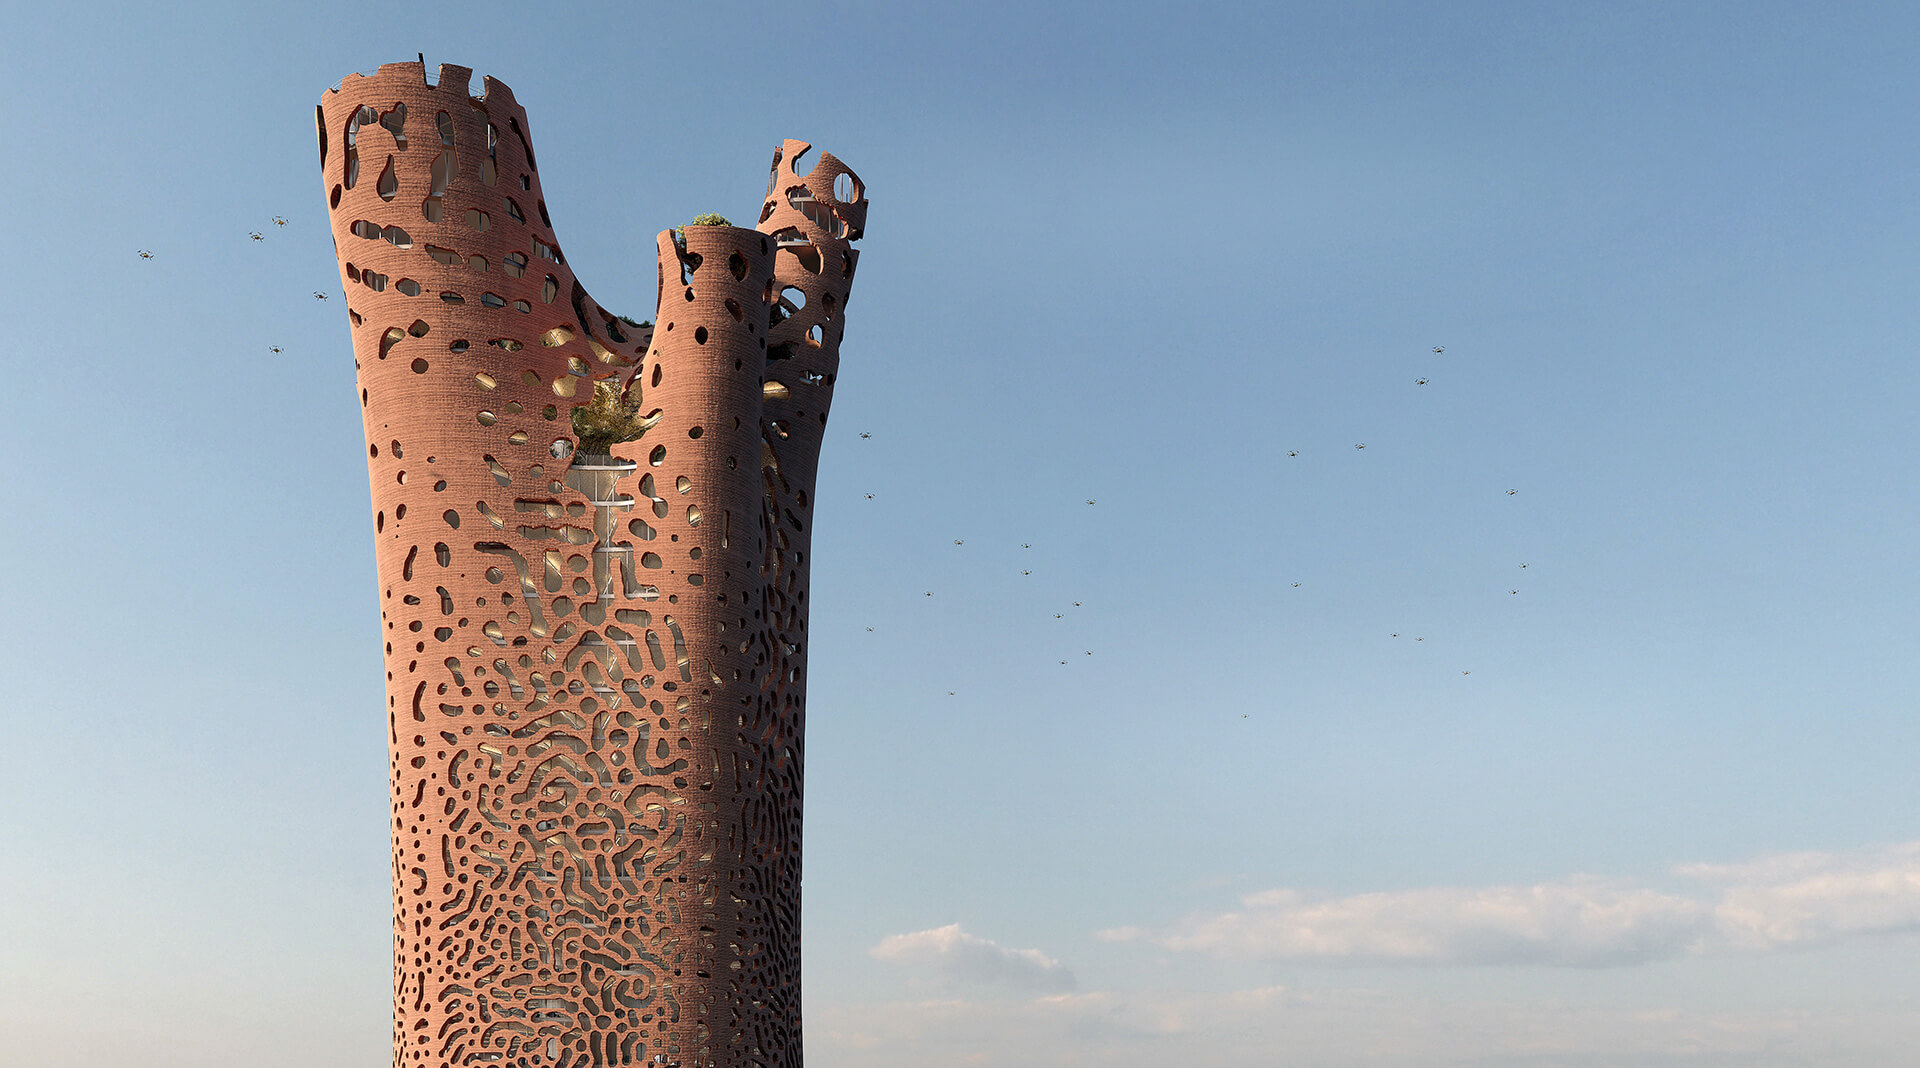 The Tower of Life by BAD, Senegal